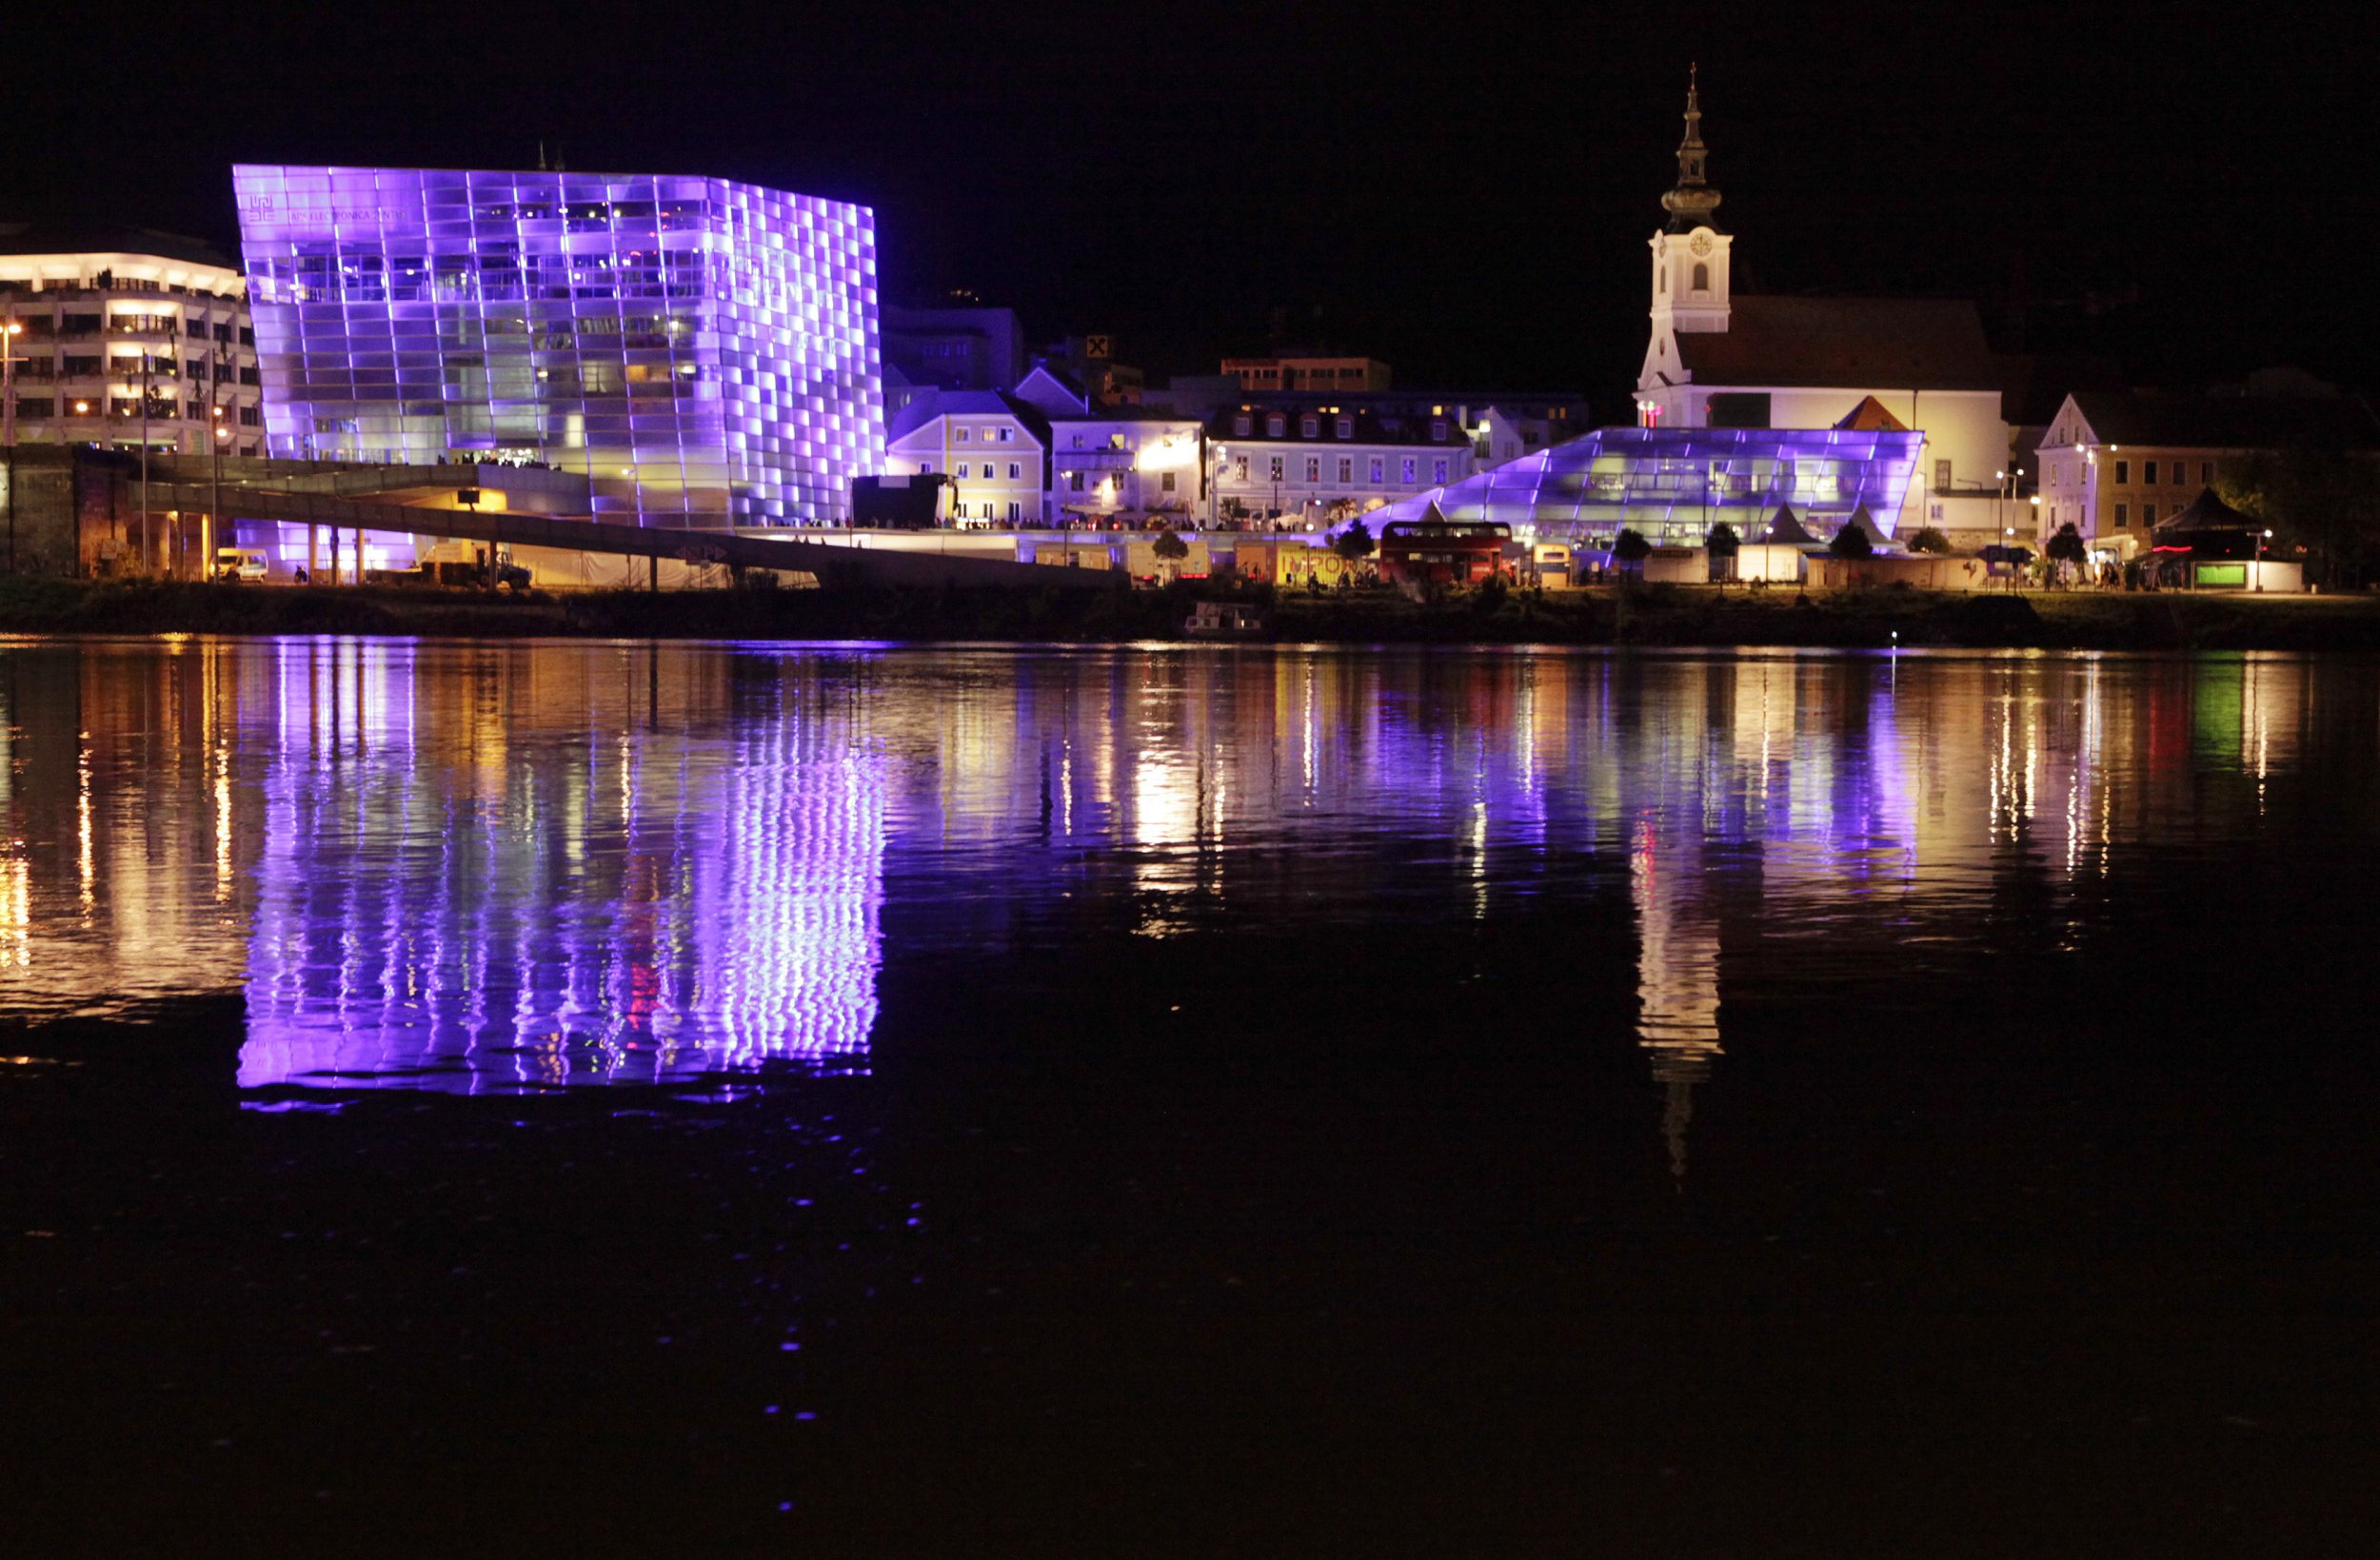 4-20-16 Ars Electronica Center